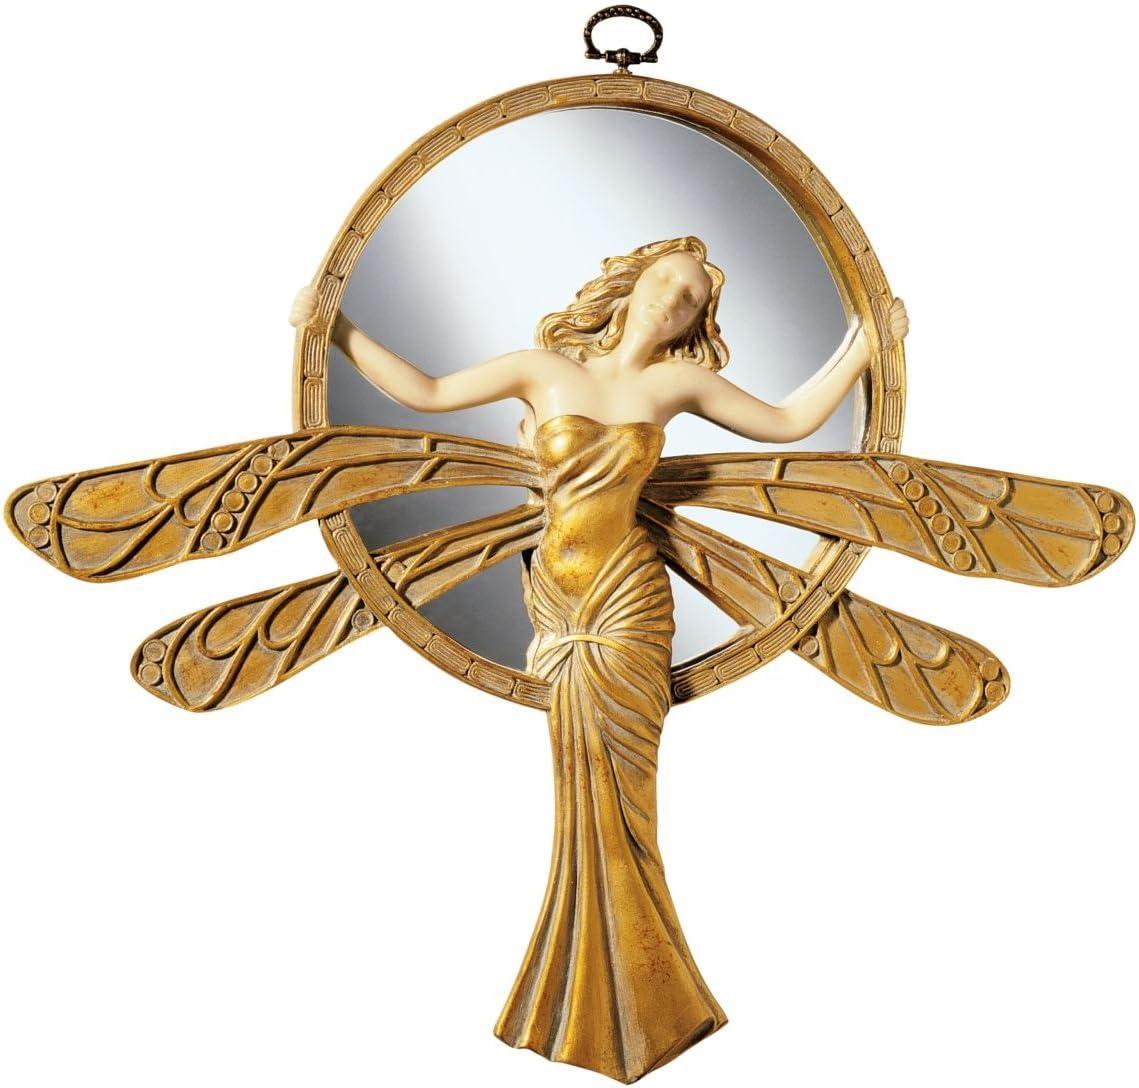 Art Deco Dragonfly Maiden 13" Gold and Ivory Round Wall Mirror